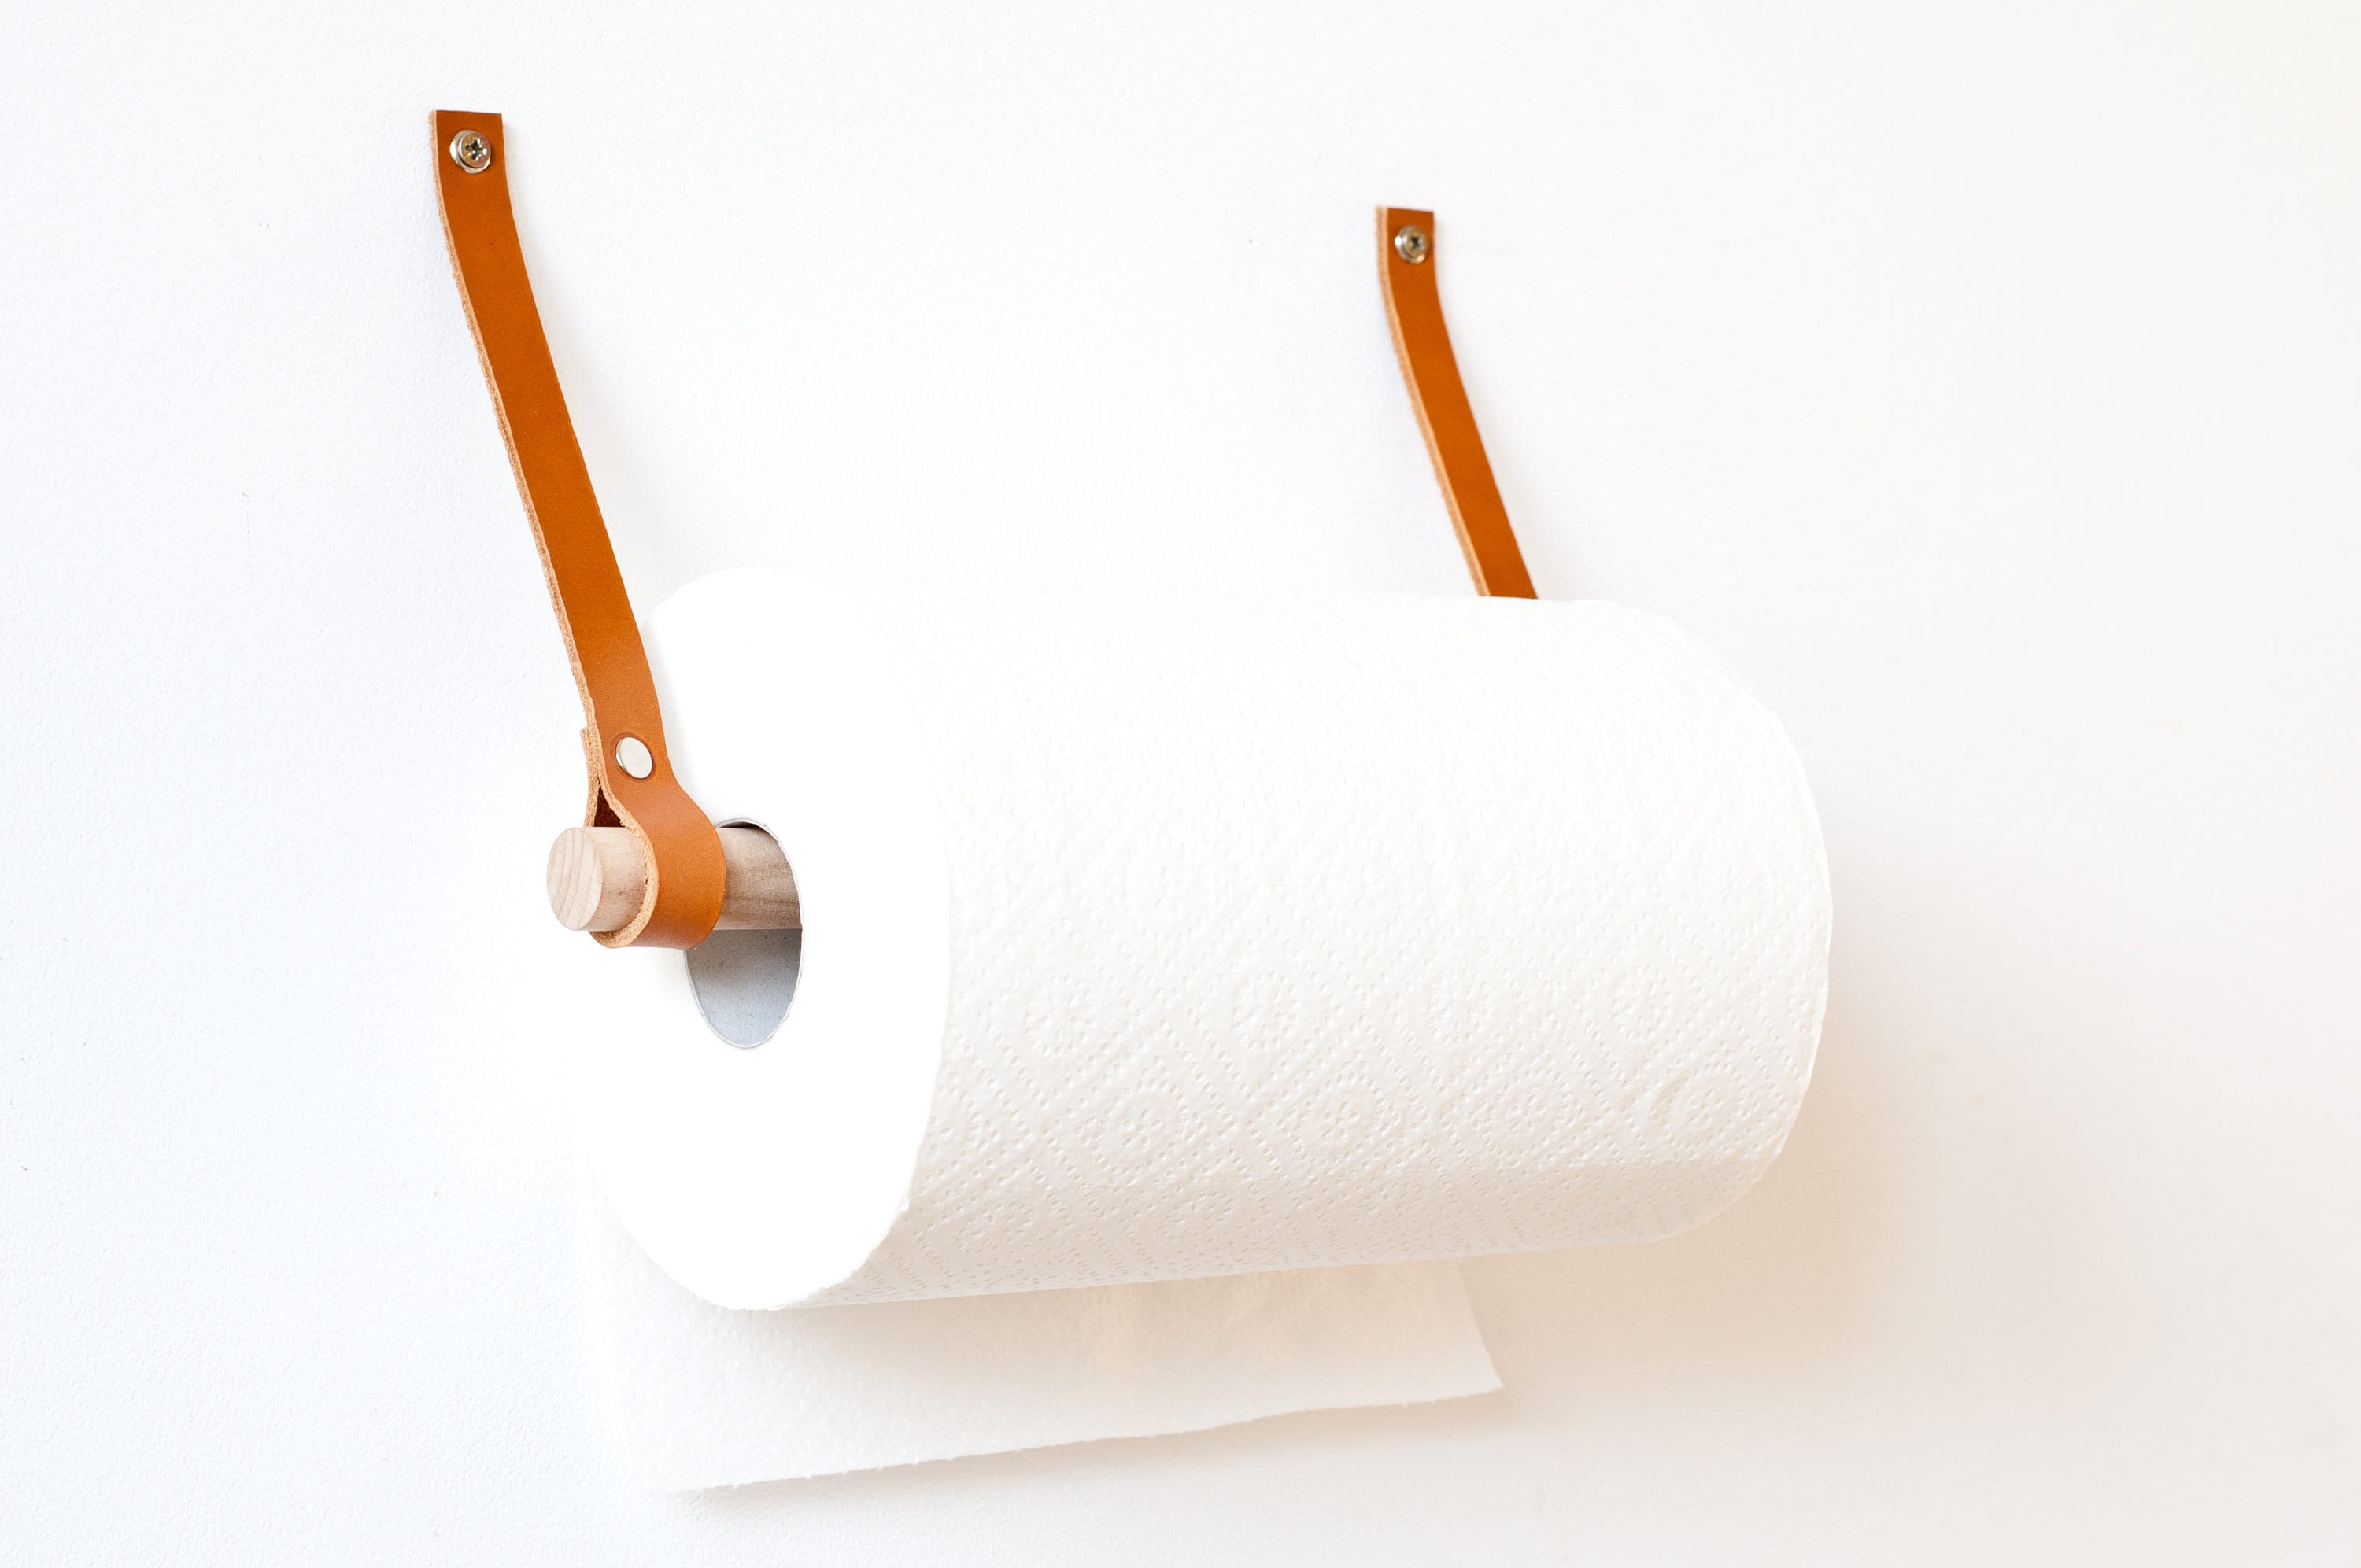 Wall-mounted toilet roll holder with 30 cm paper reel. Packaging paper  dispenser in rolls up to 31cm 12 - Cablematic